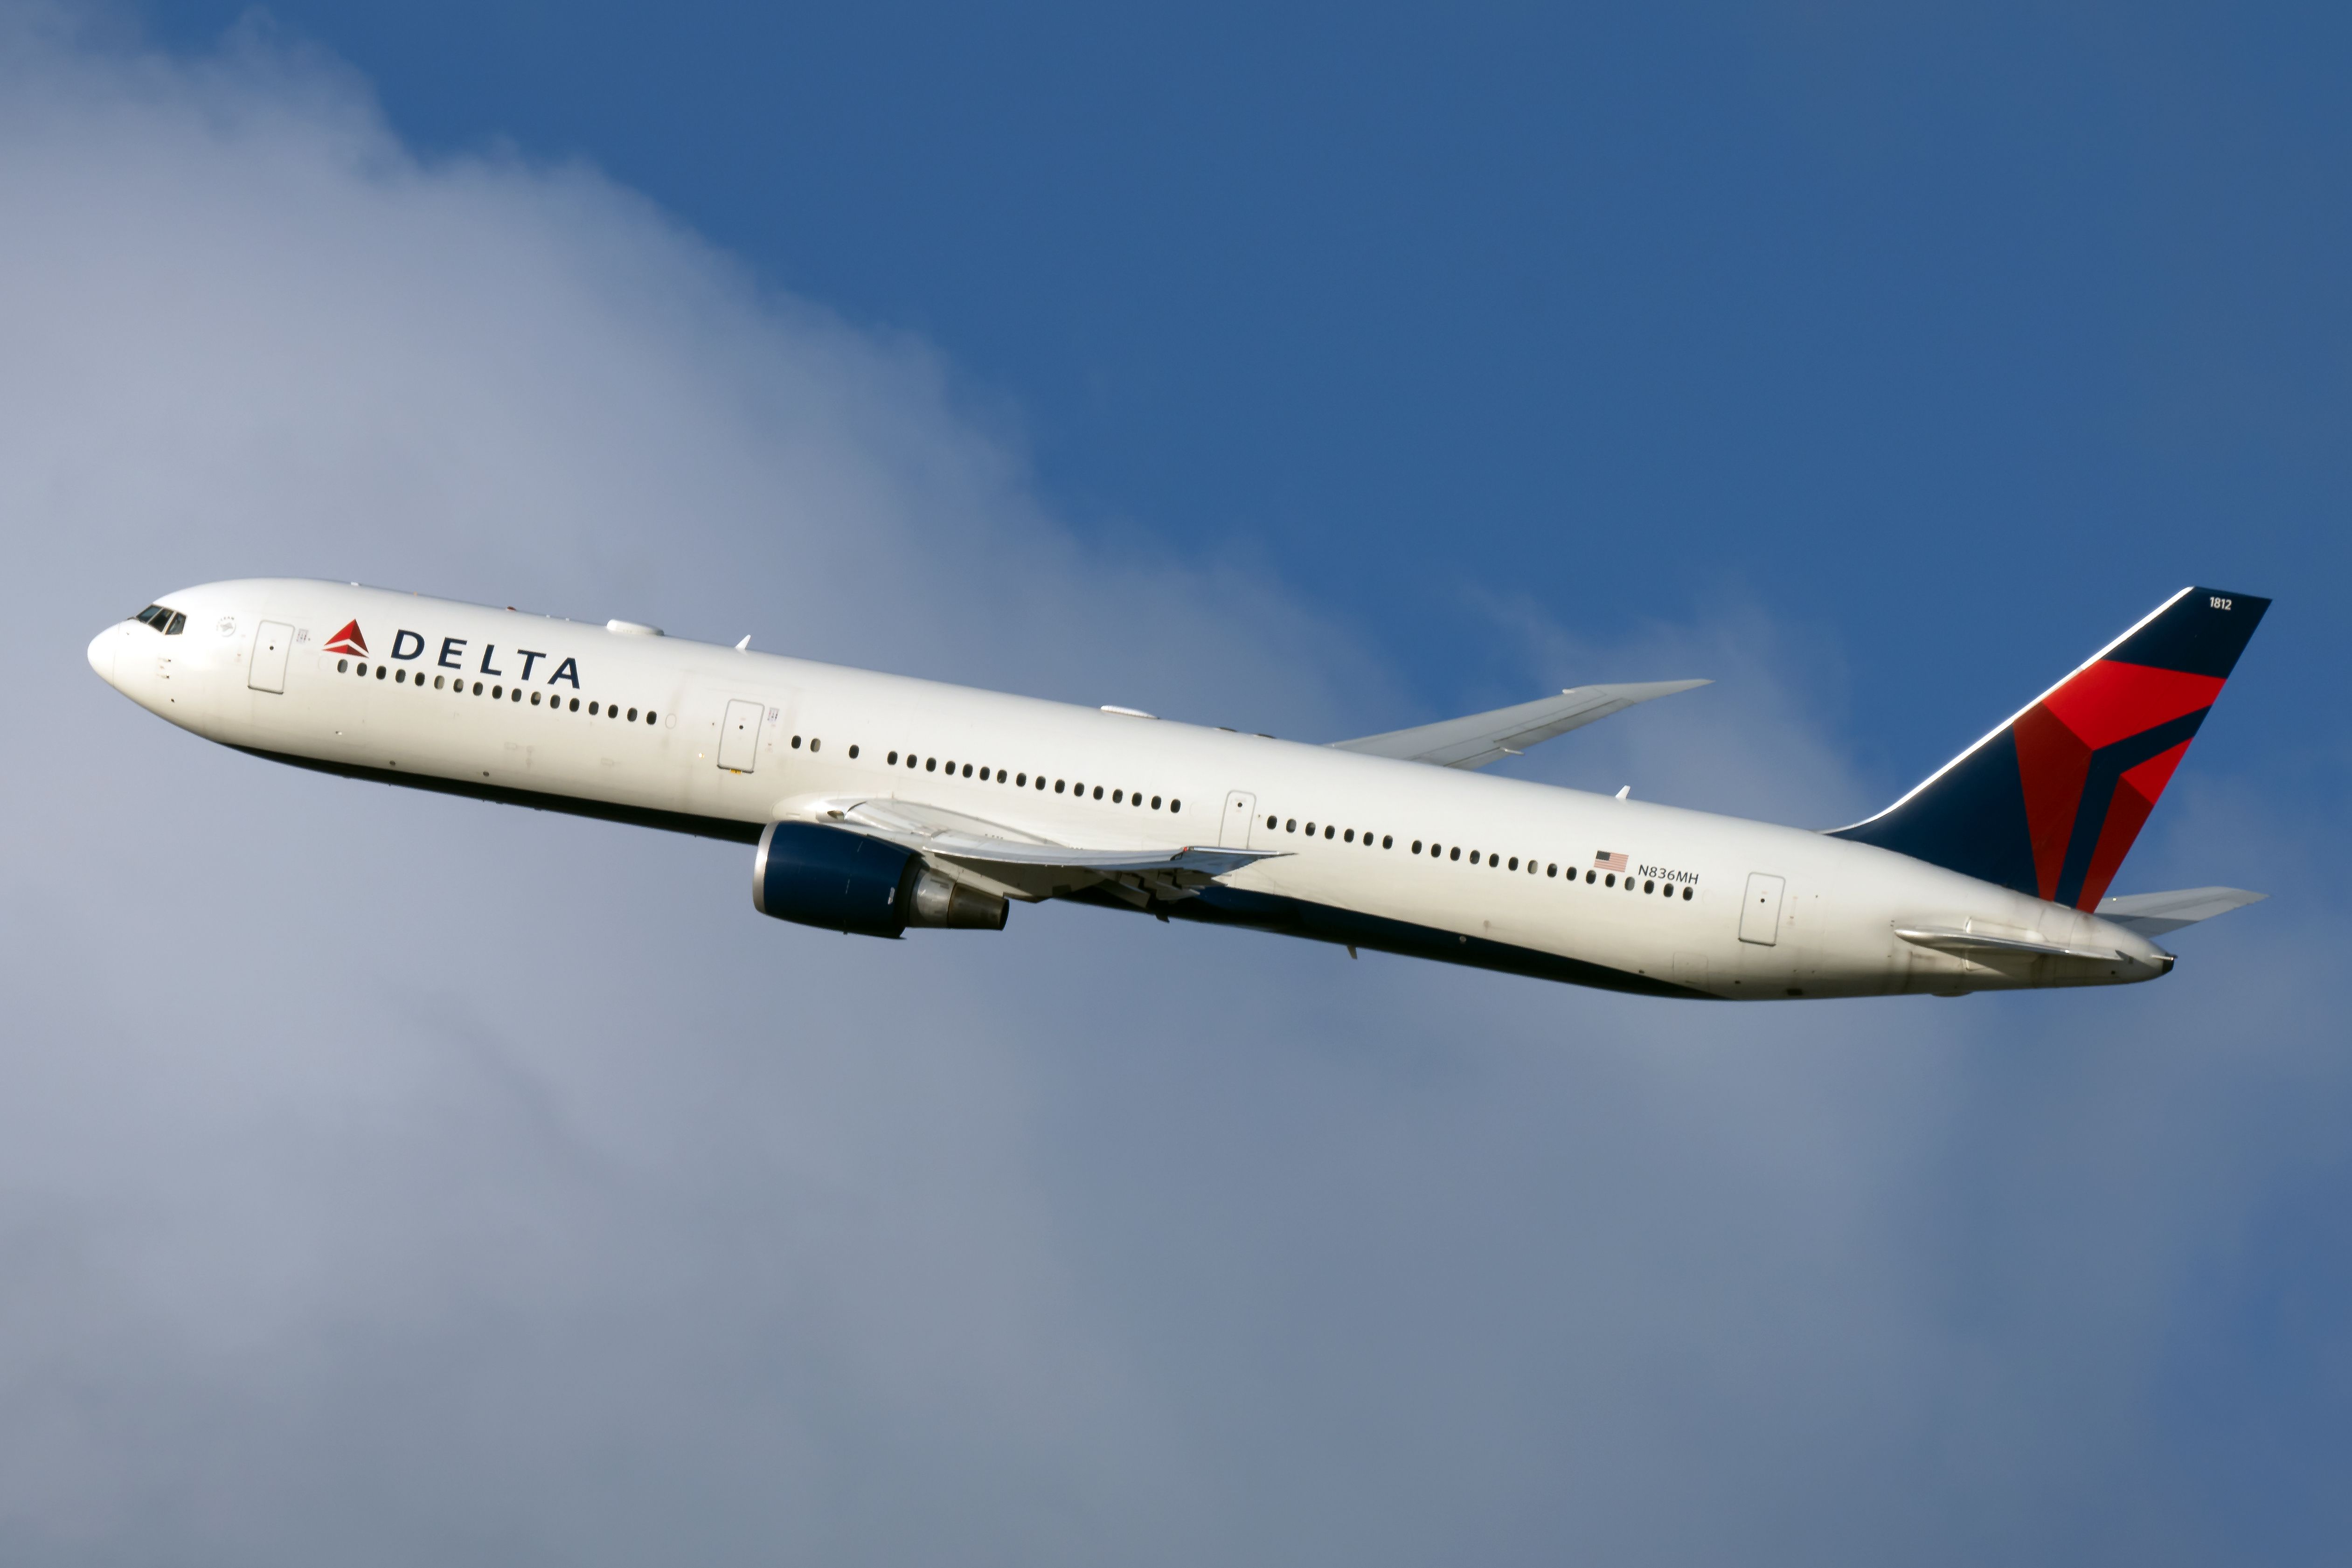 United Airlines Plans 34 Domestic Widebody Routes This Summer